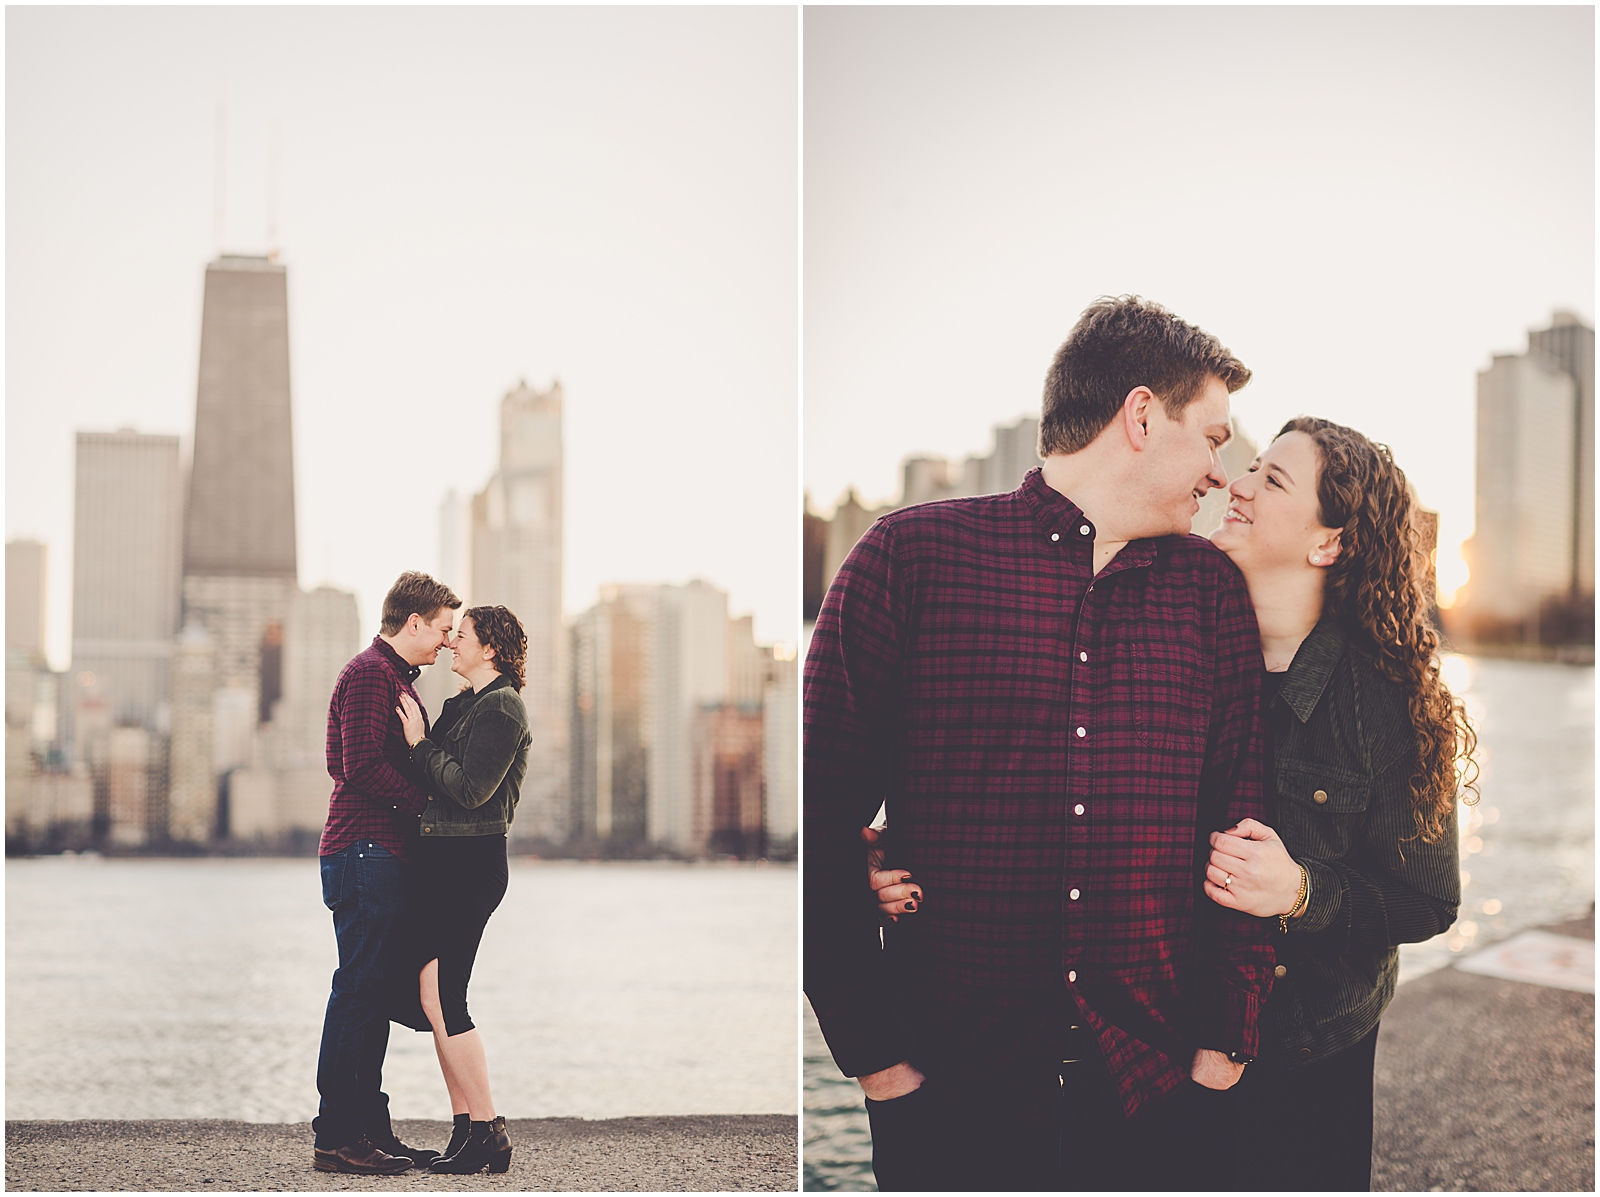 You're engaged, what's next? - a jumpstart wedding planning list of advice with Chicagoland wedding photographer Kara Evans Photographer.